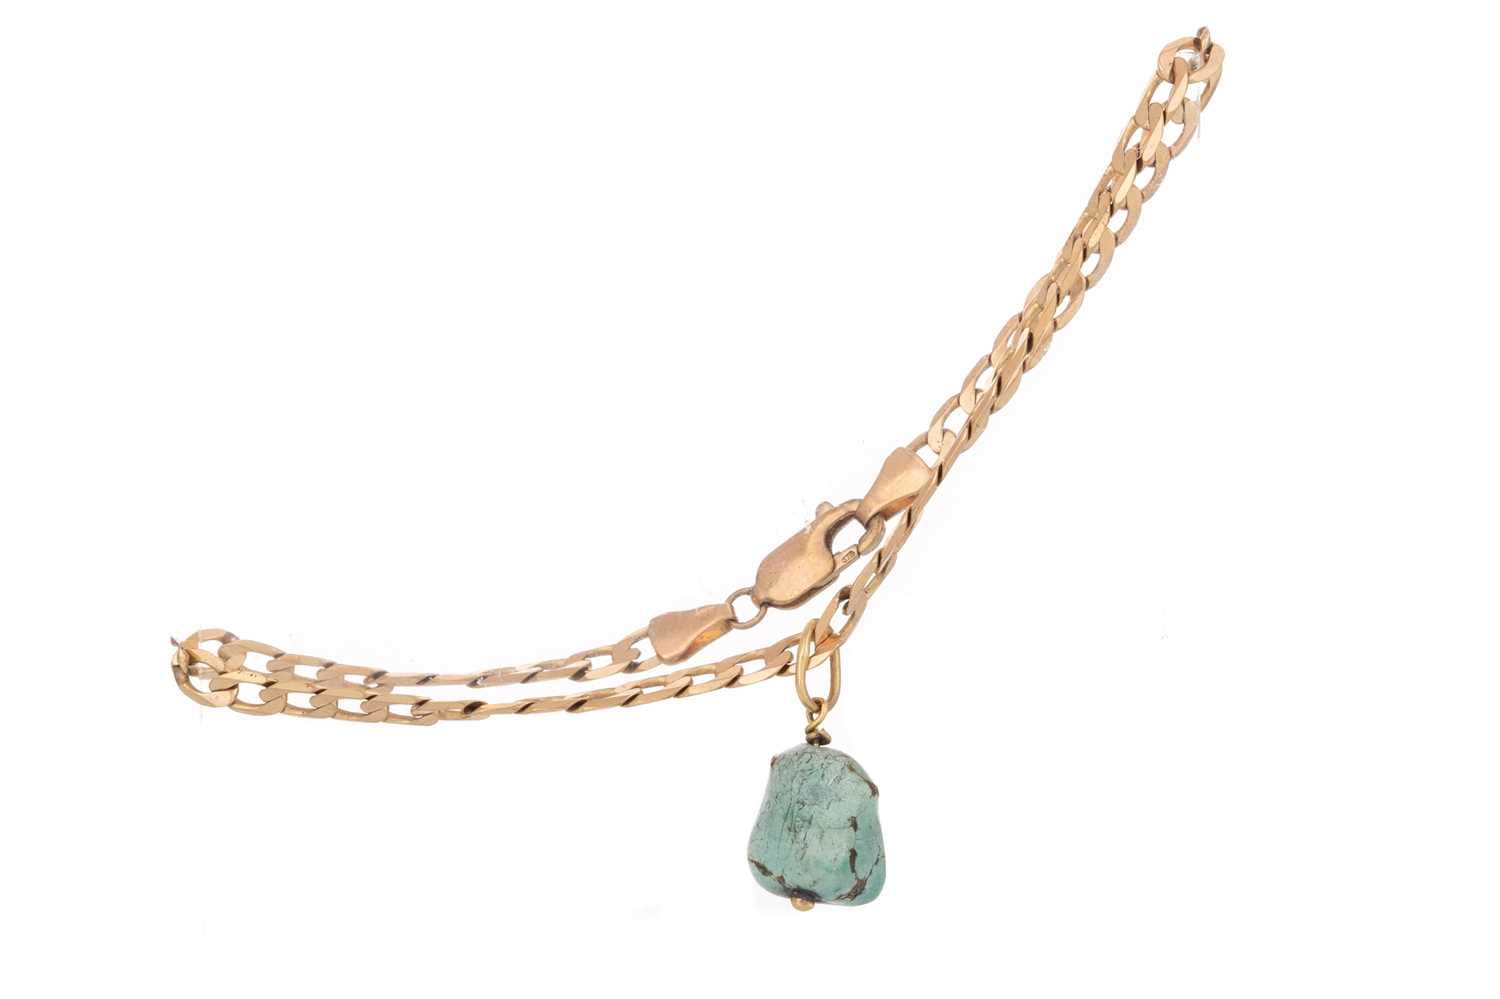 Lot 478 - CURB LINK BRACELET WITH TURQUOISE CHARM